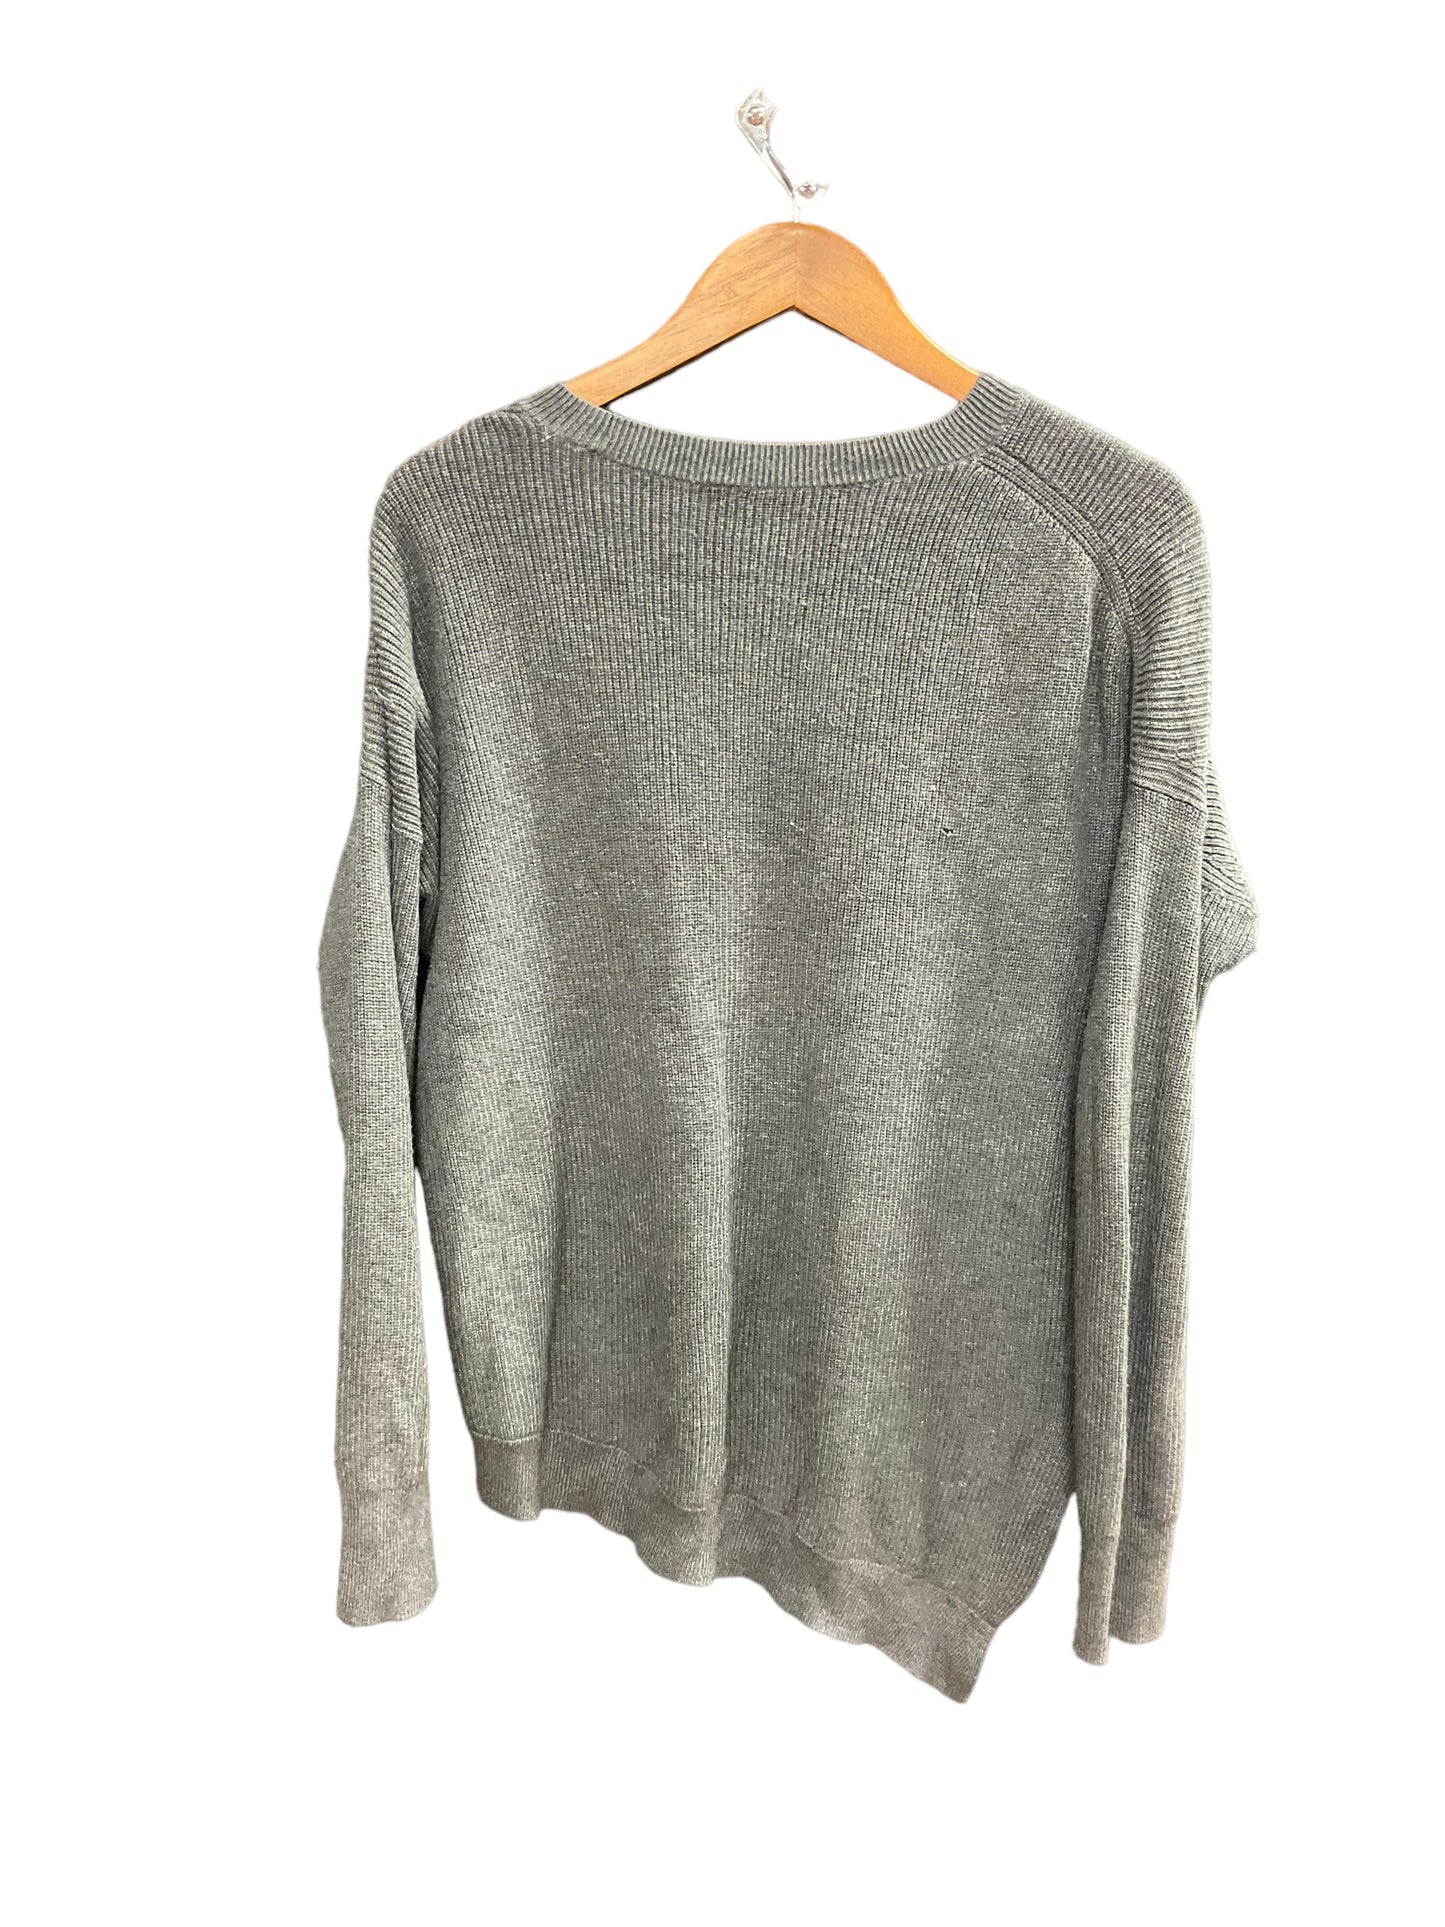 Sweater By Athleta  Size: S